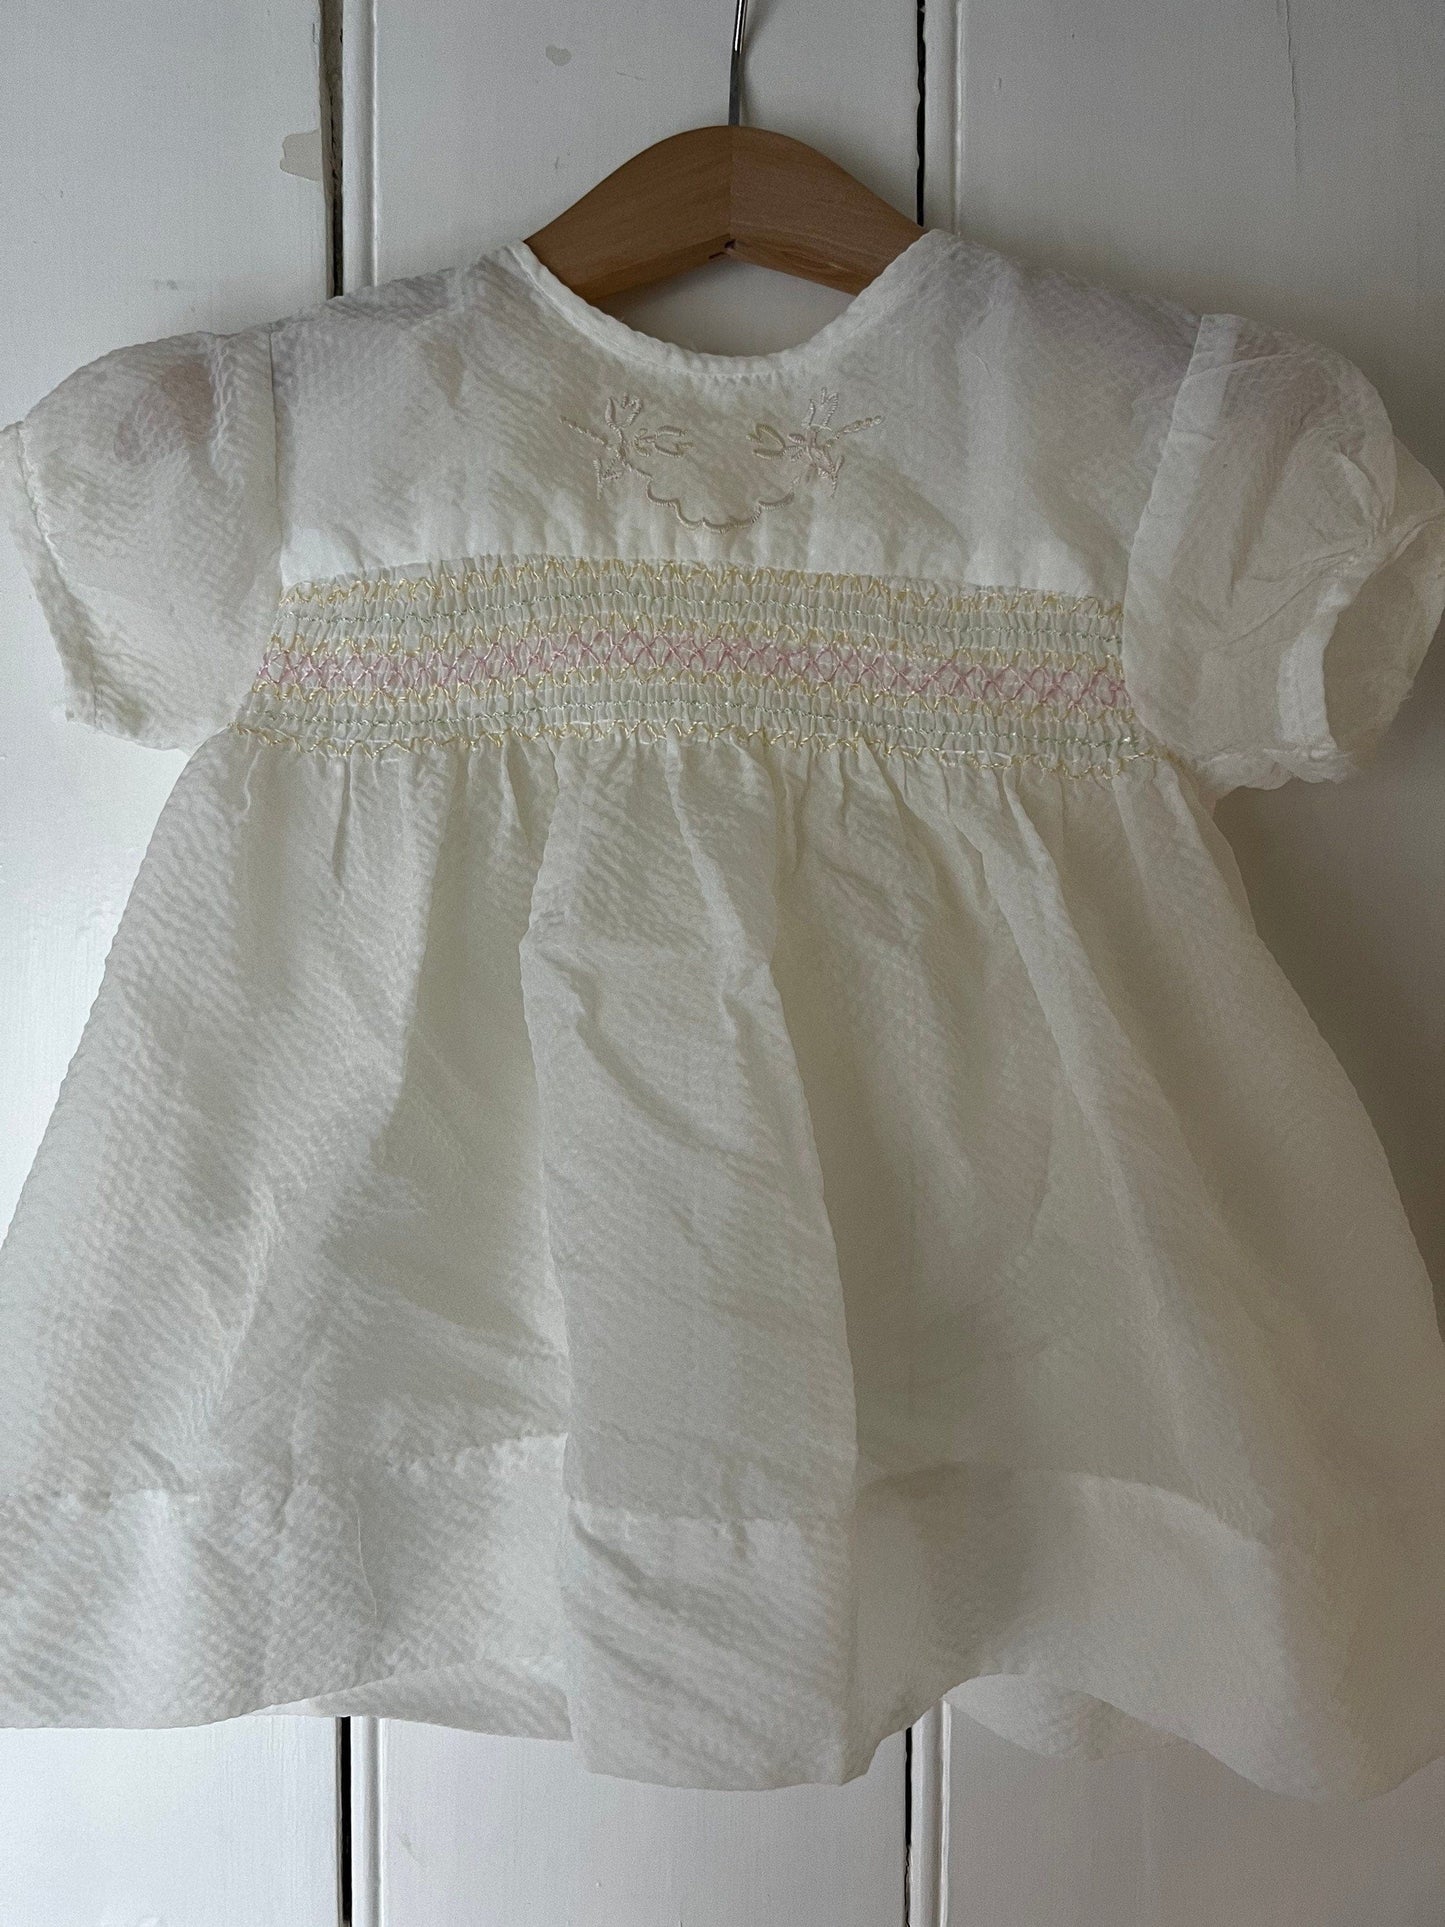 Vintage Girls Dress - off white and pink terylene Dress Baby Dress age 2-3 years